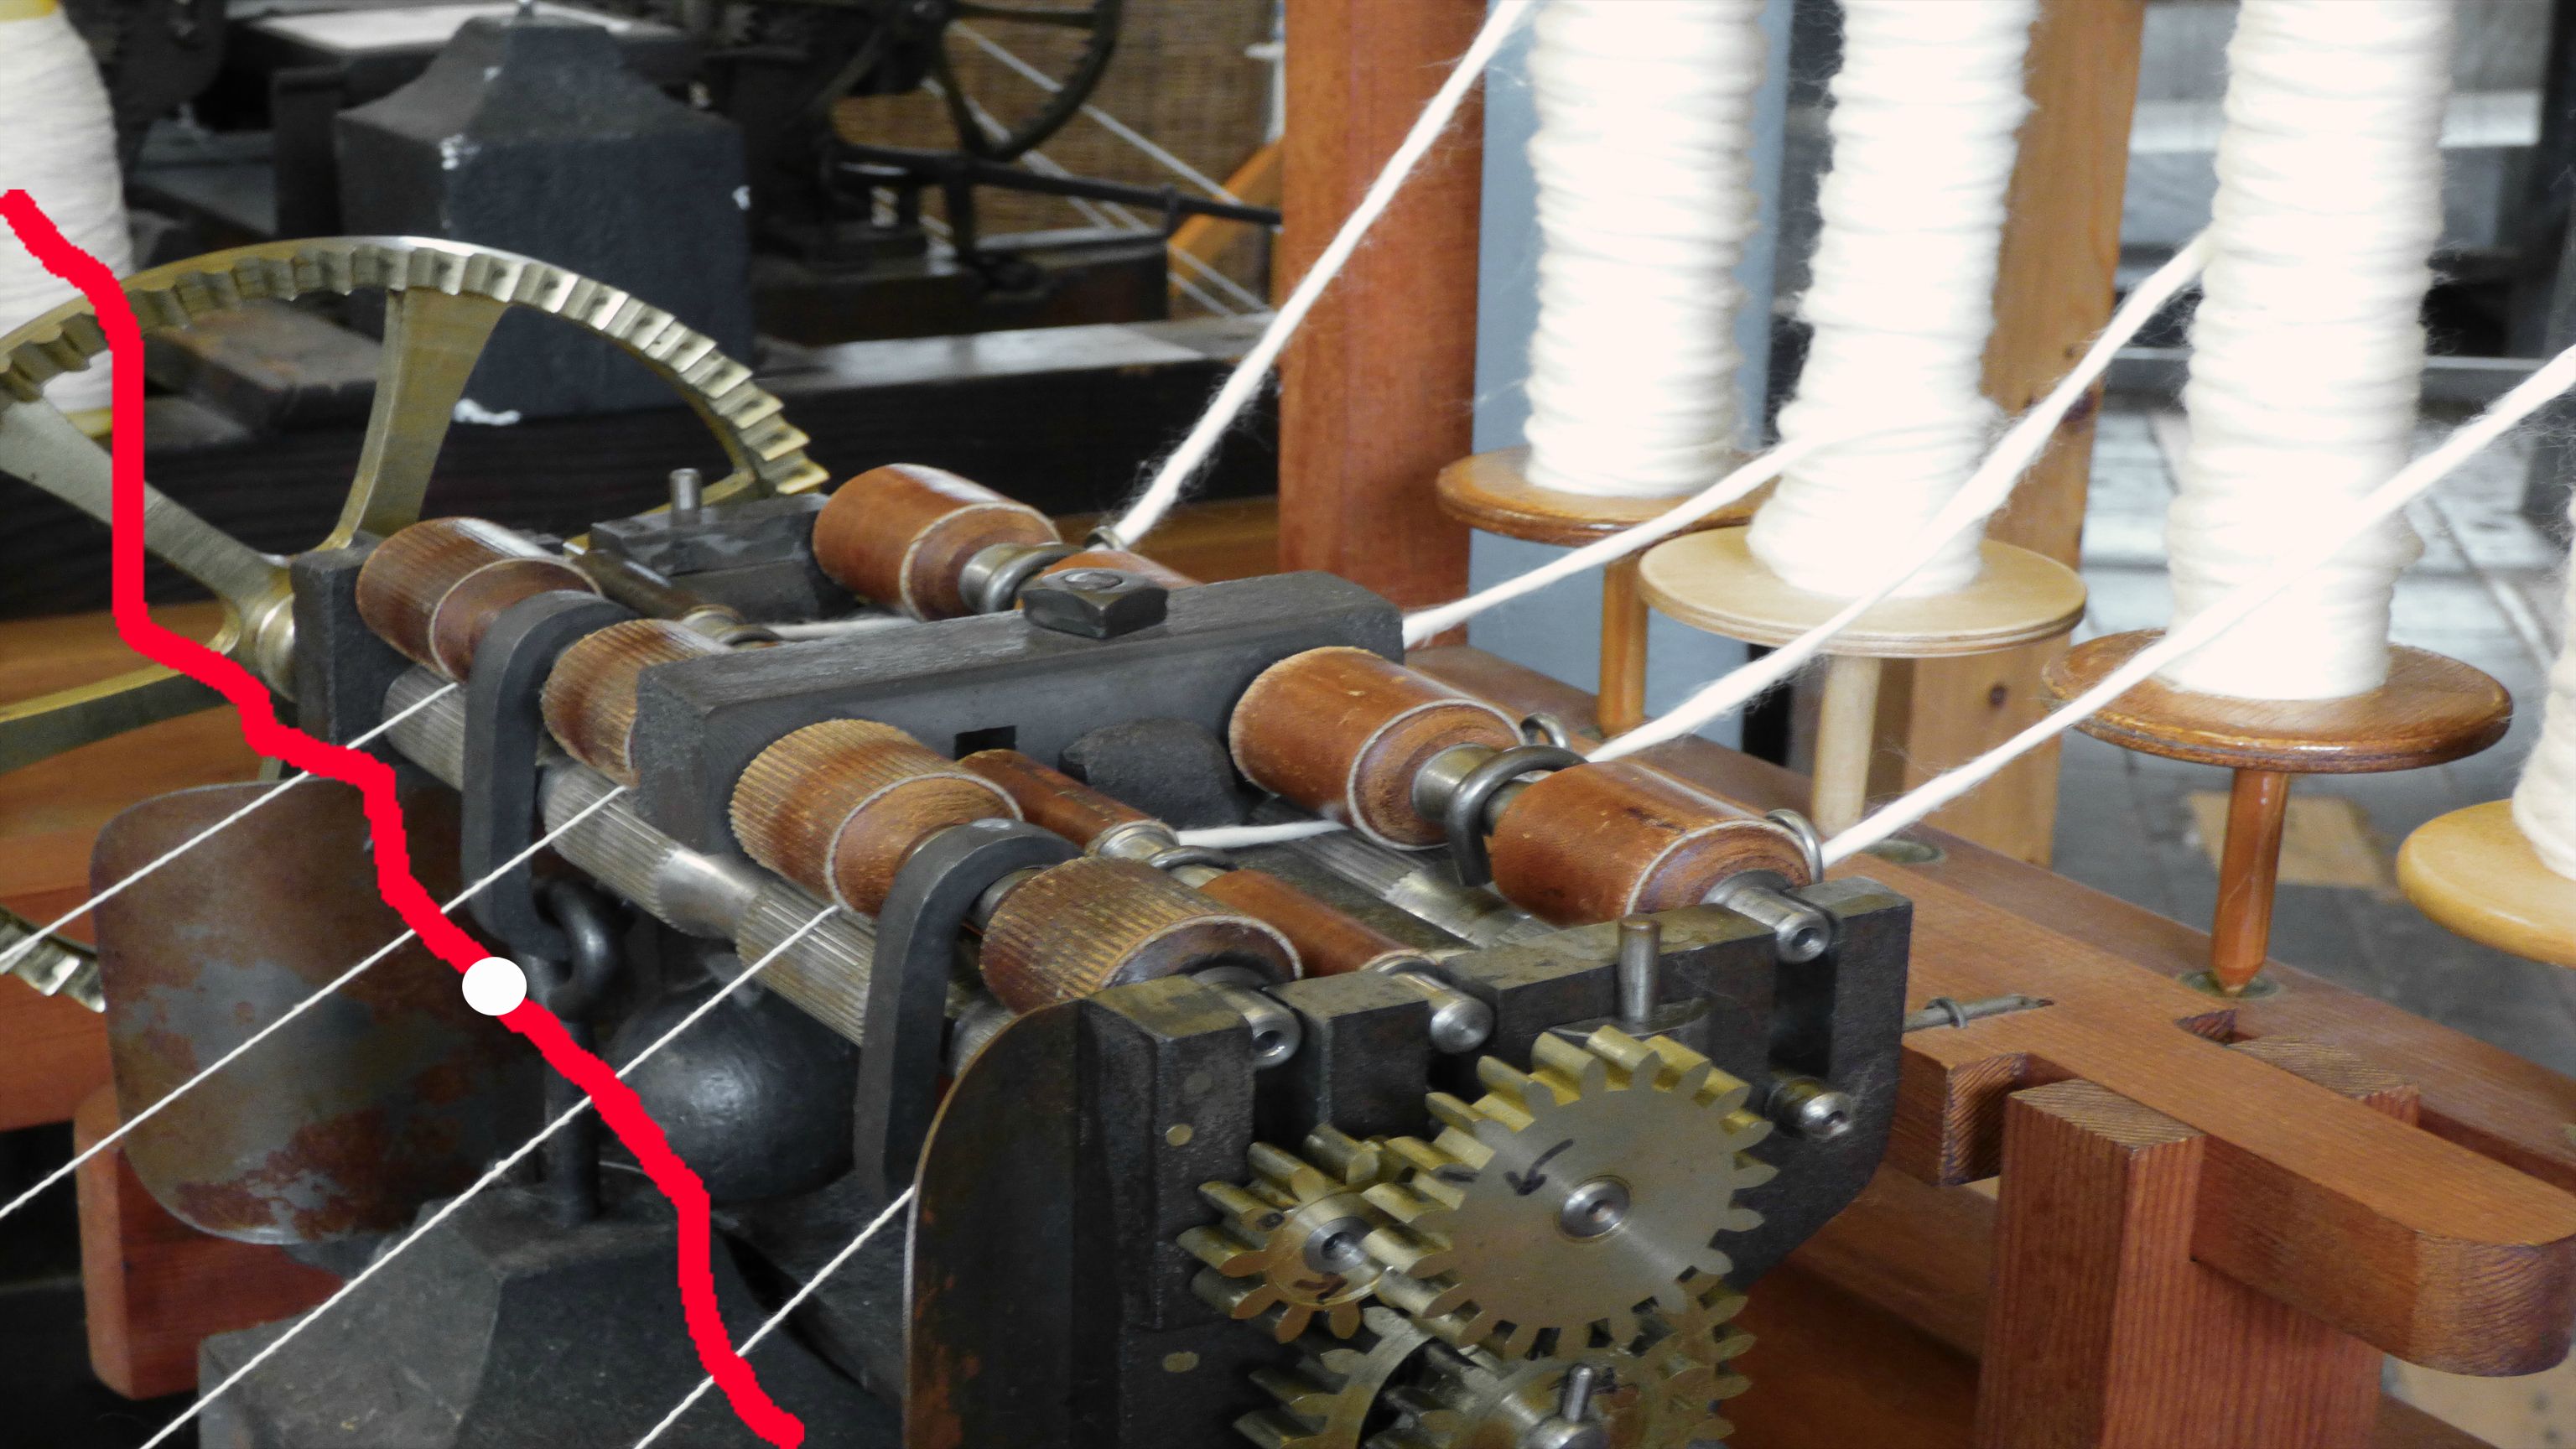 ...it was here that industry started with the development of mechanised ways of spinning cotton.